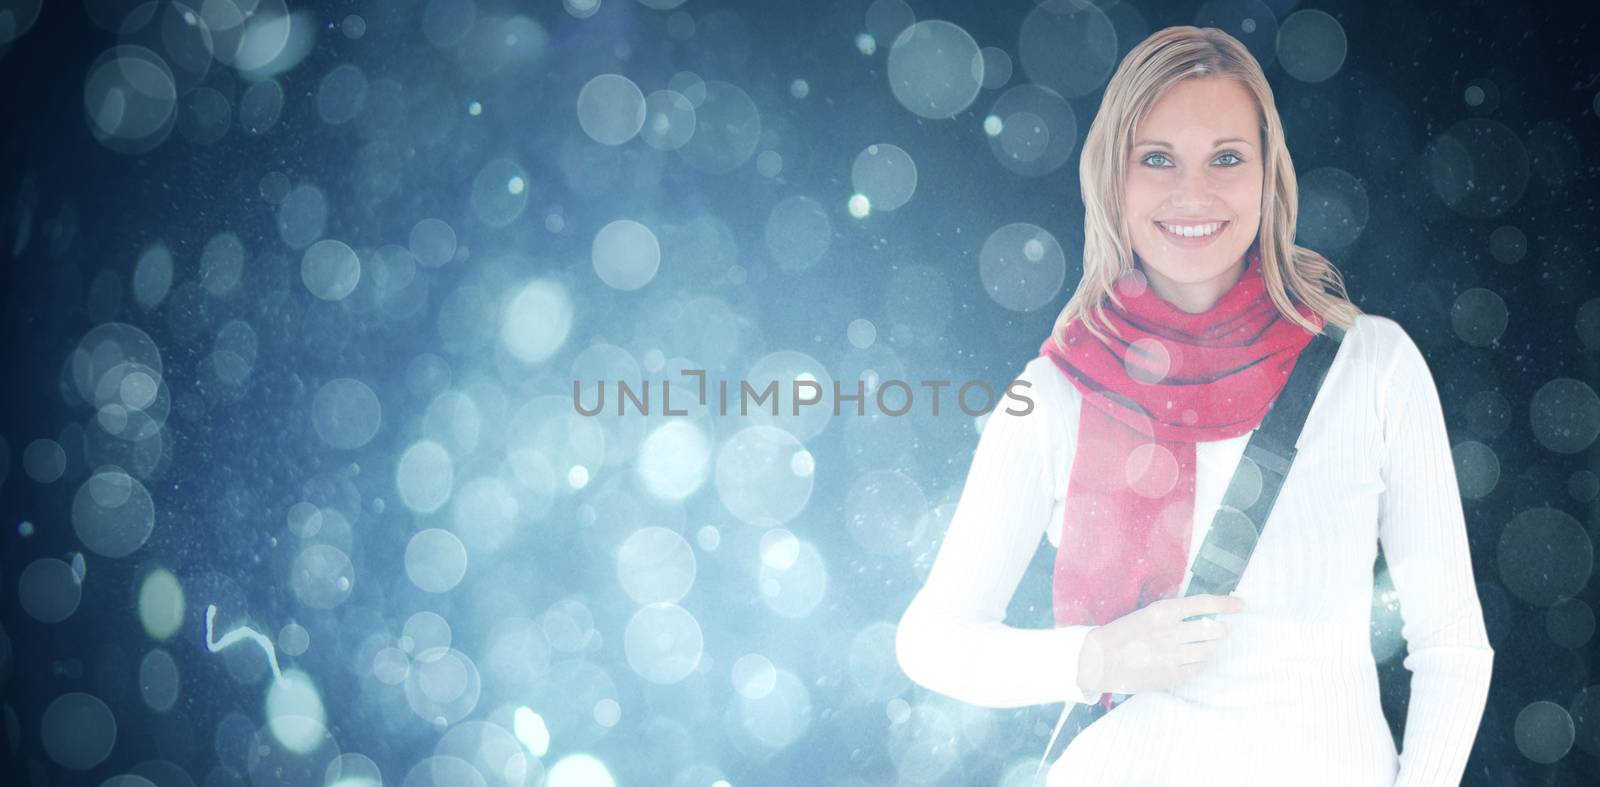 Composite image of portrait of a delighted student with scarf smiling at the camera by Wavebreakmedia